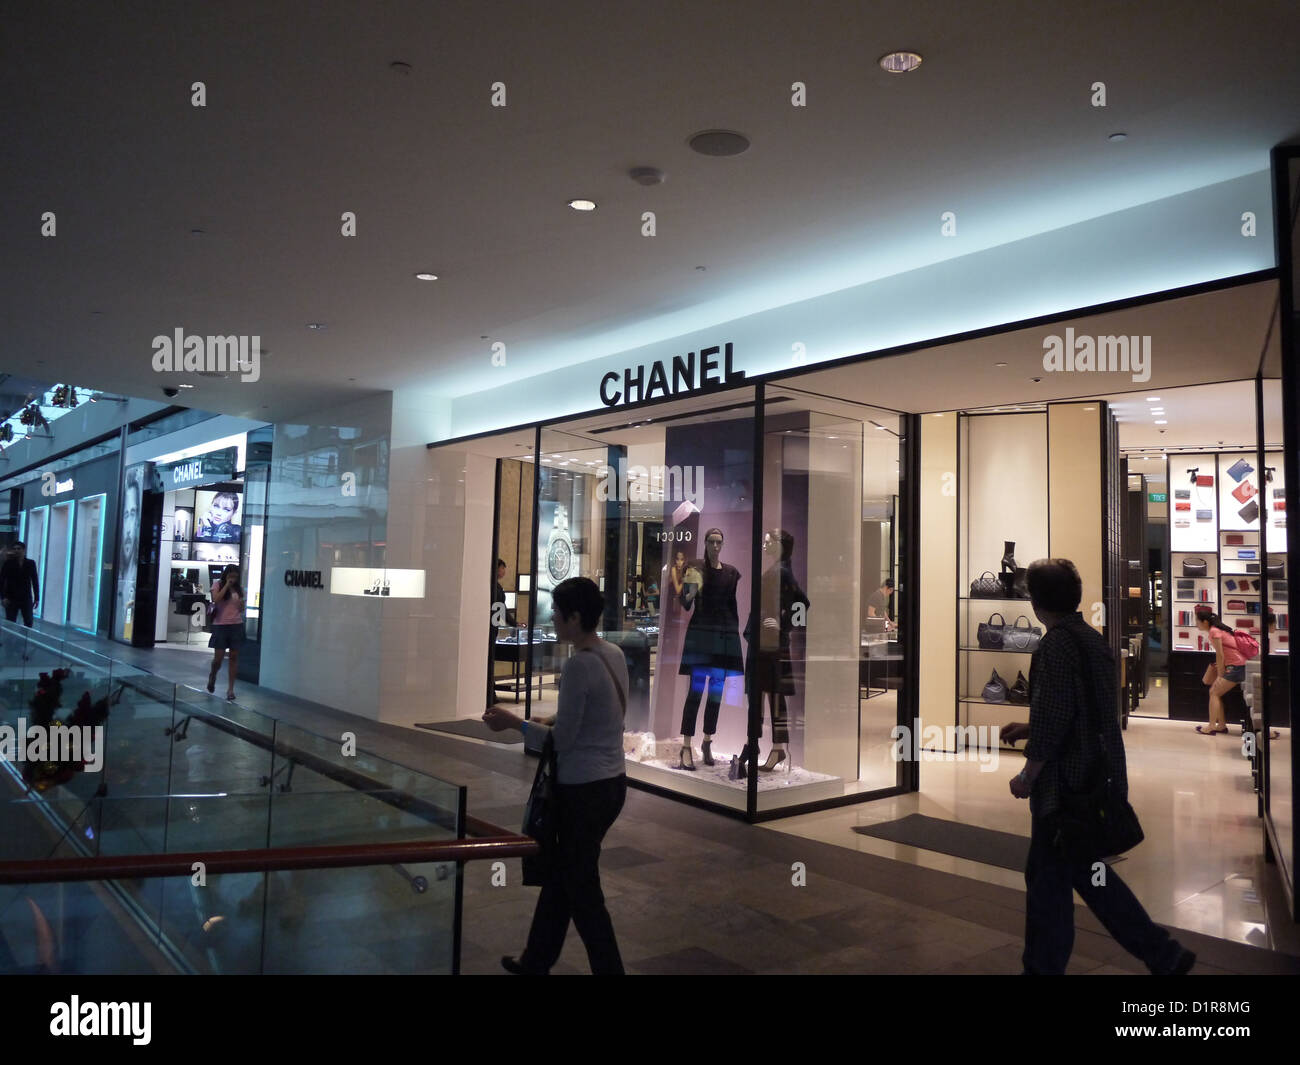 3+ Thousand Chanel Store Royalty-Free Images, Stock Photos